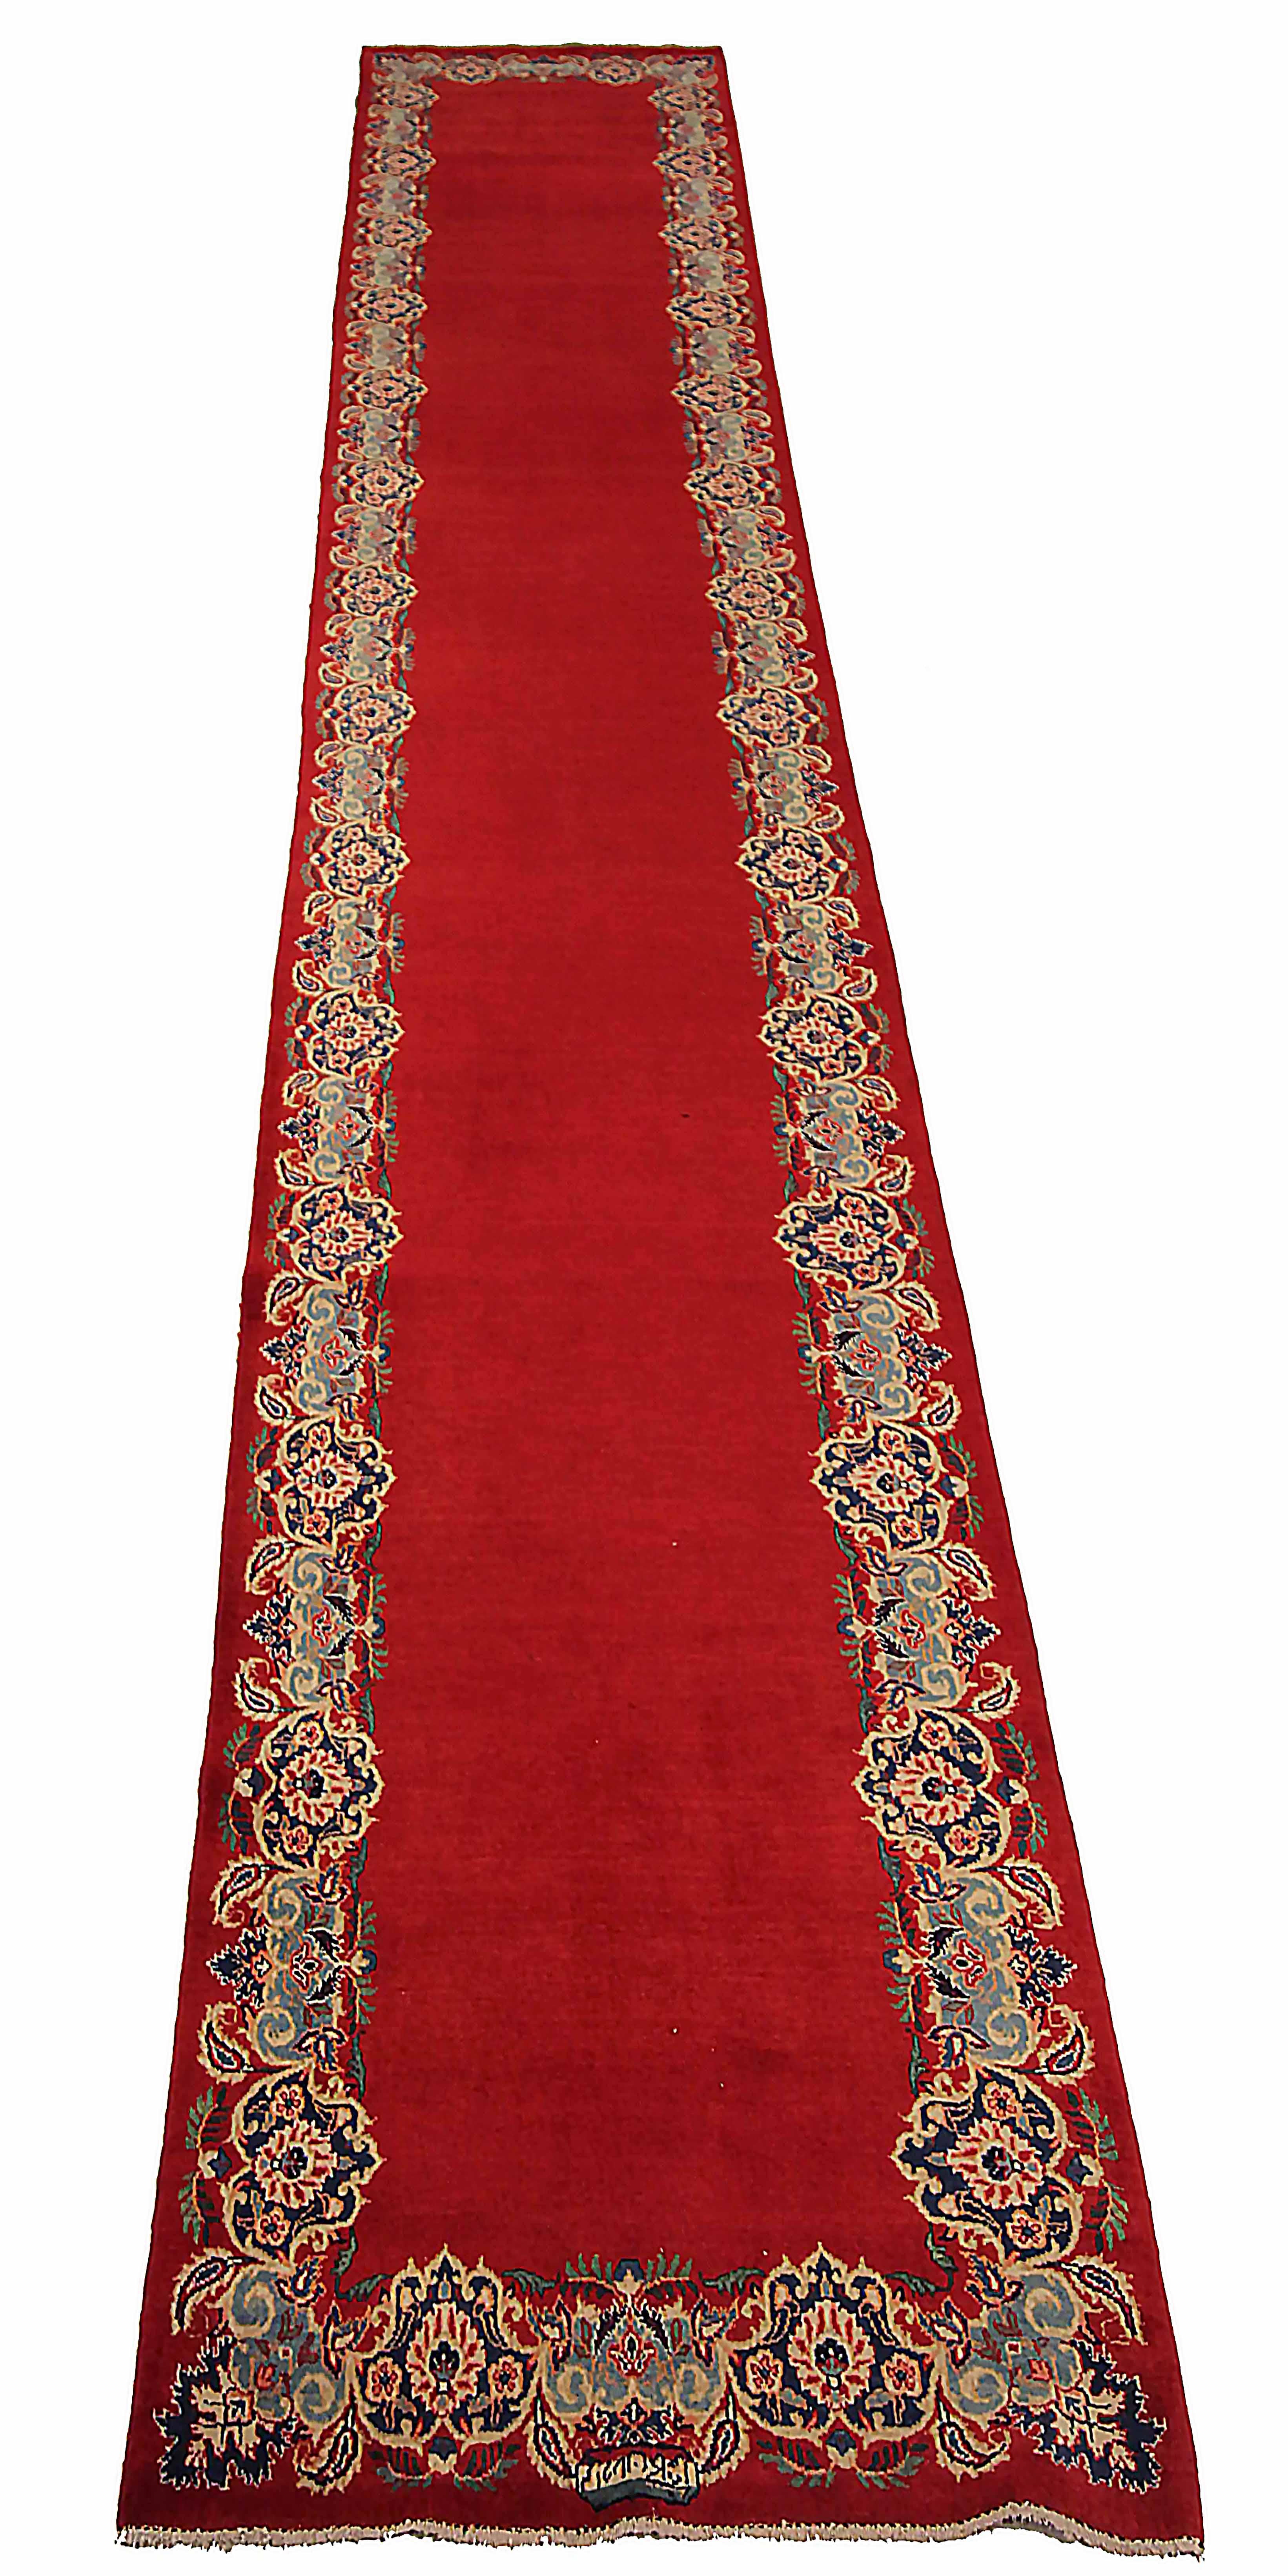 Antique Persian runner rug handwoven from the finest sheep’s wool. It’s colored with all-natural vegetable dyes that are safe for humans and pets. It’s a traditional Kashan design handwoven by expert artisans. It’s a lovely runner rug that can be